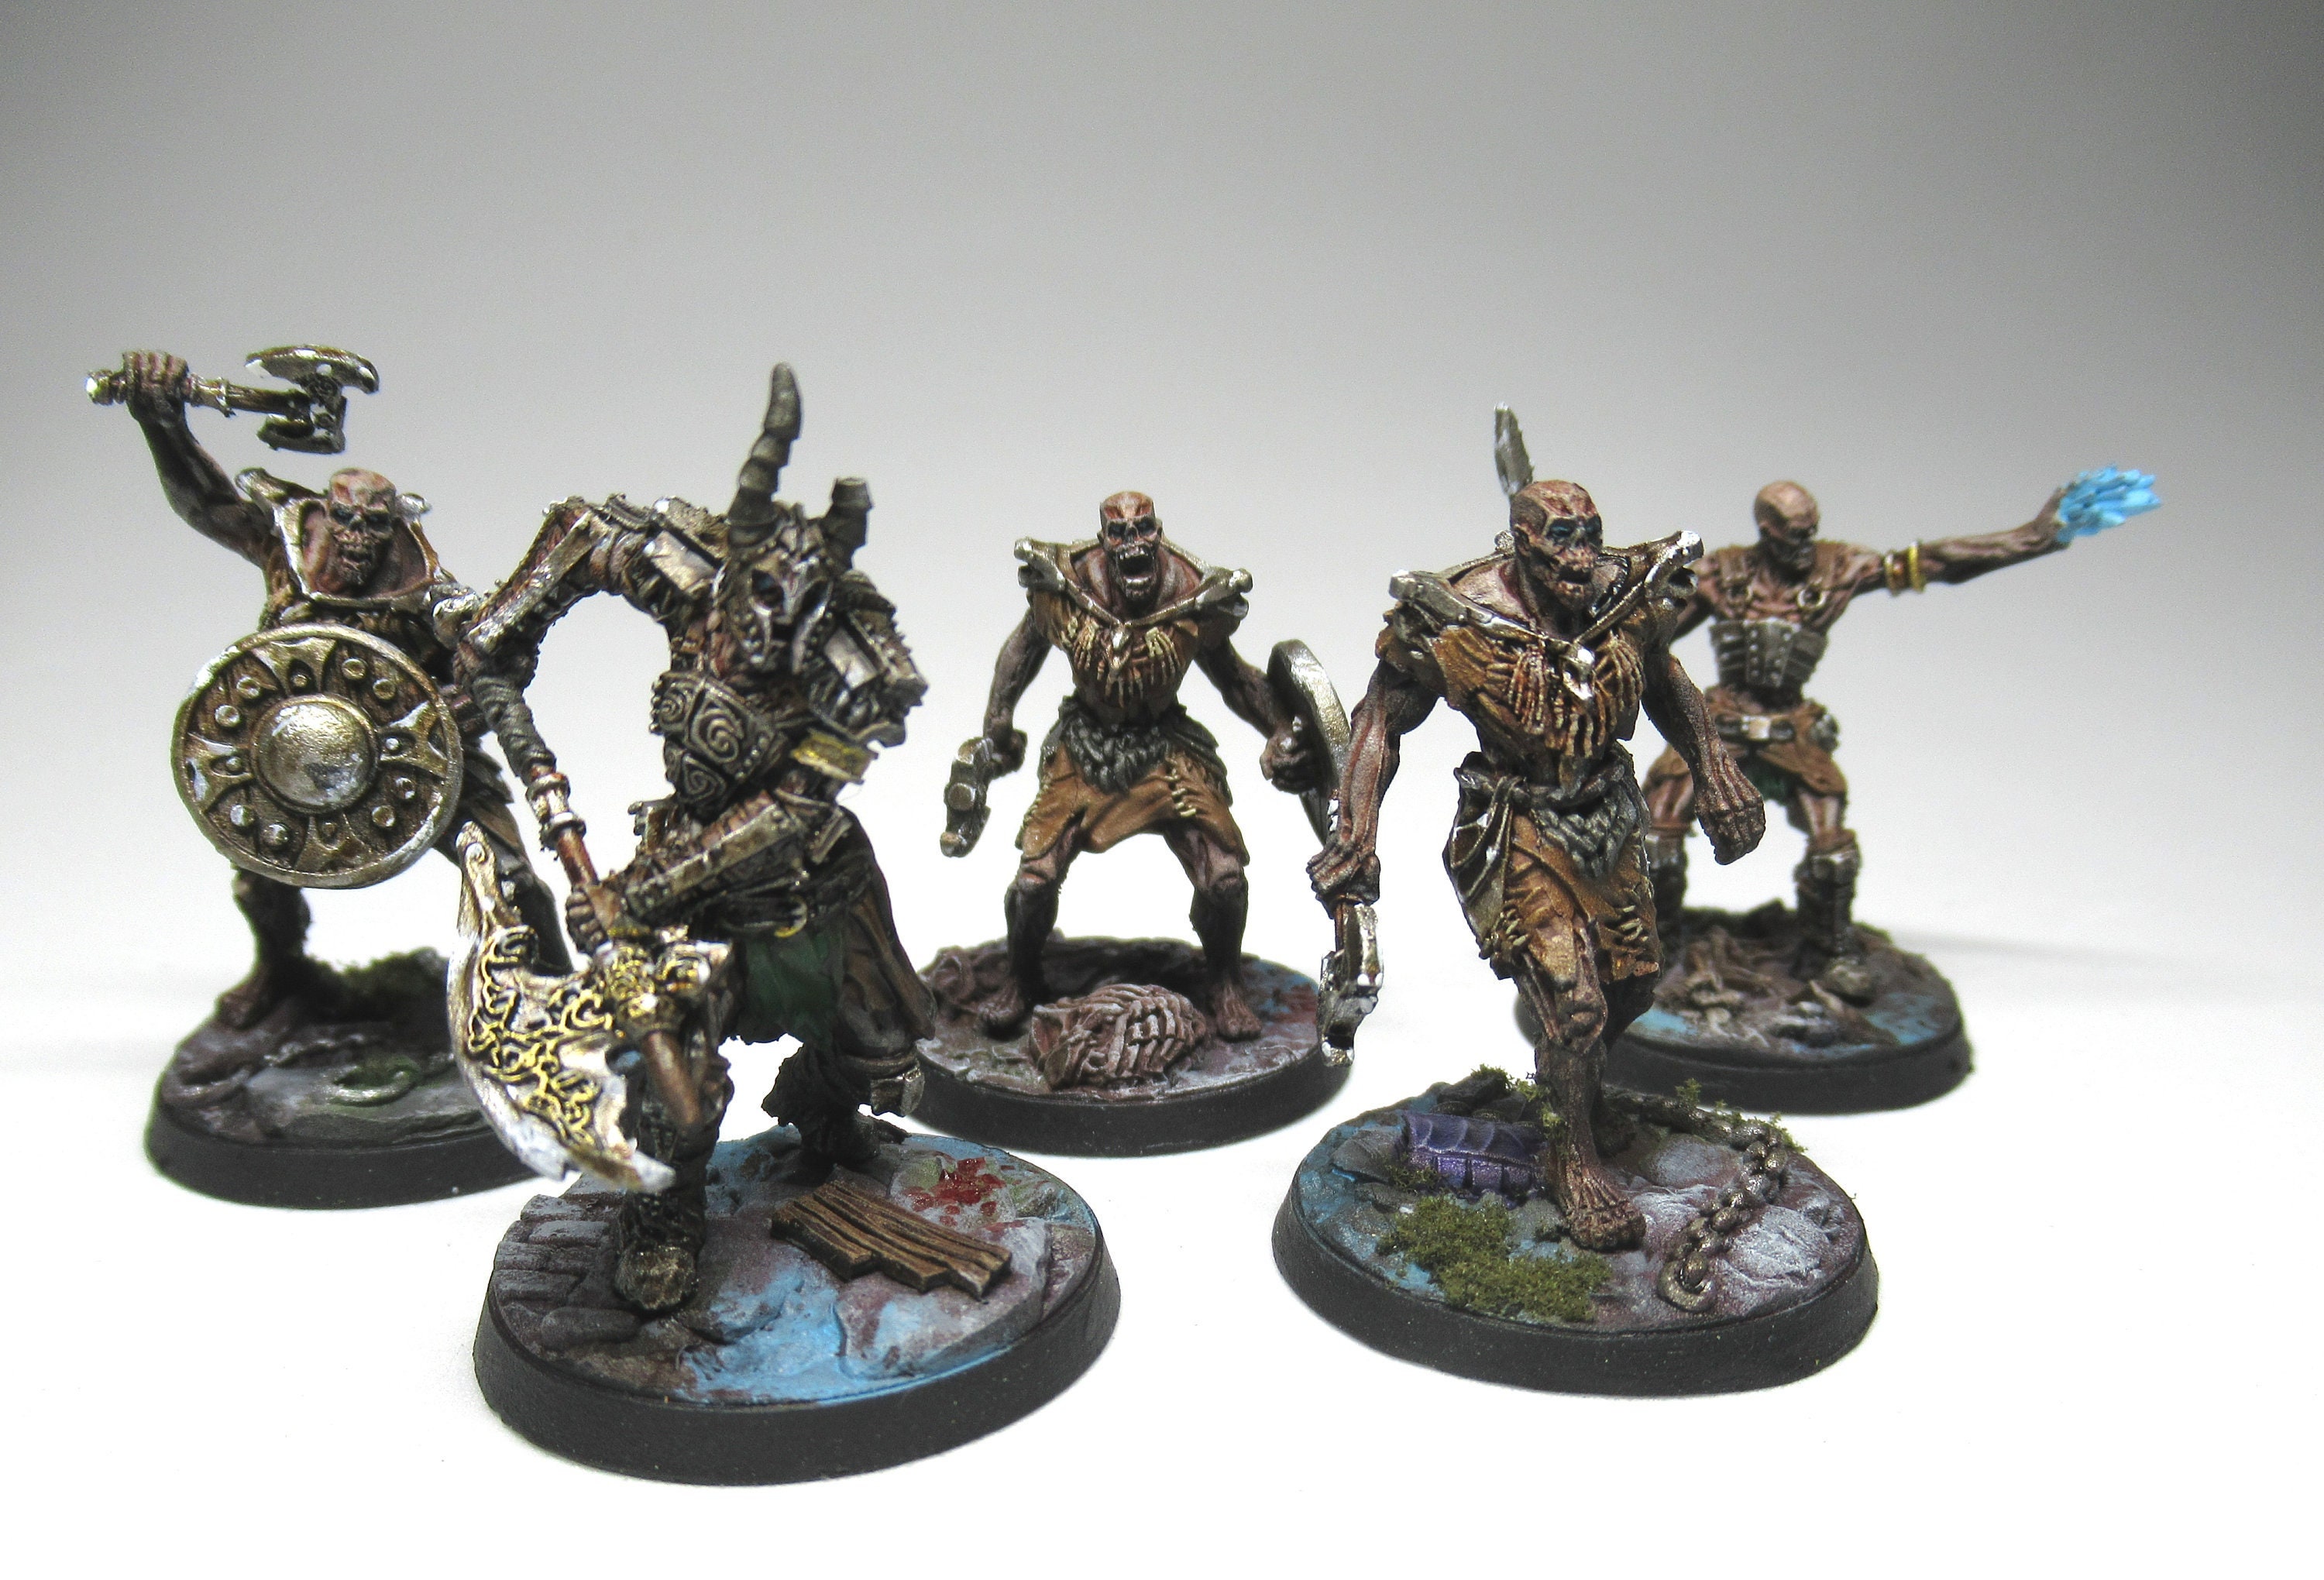 Imperial Faction Painted Miniatures Skyrim the Elder Scrolls: Call to Arms  Gaming Dnd Board Games Commission Decor 